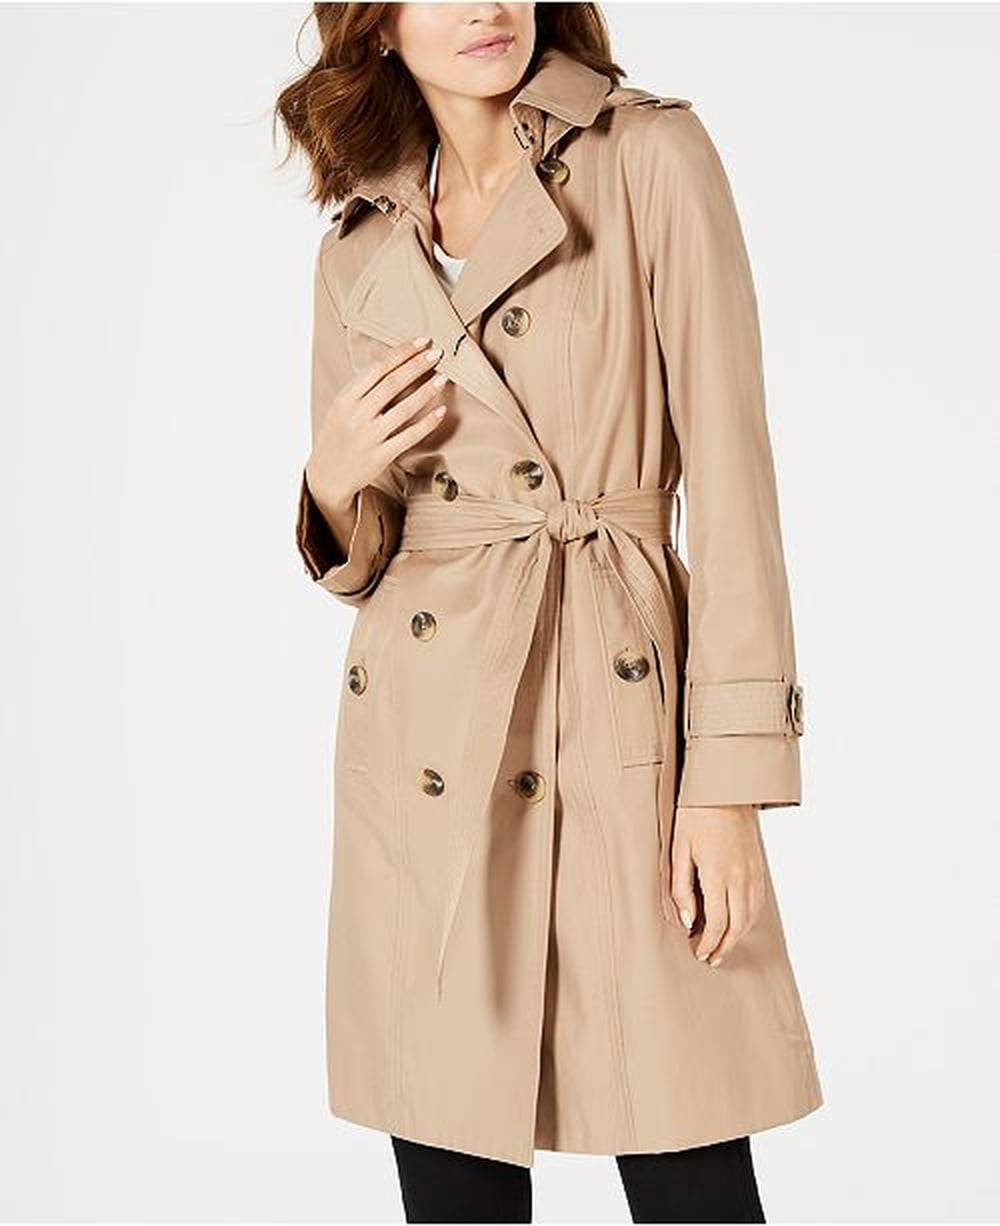 The Best Coats For Women at Macy's | POPSUGAR Fashion